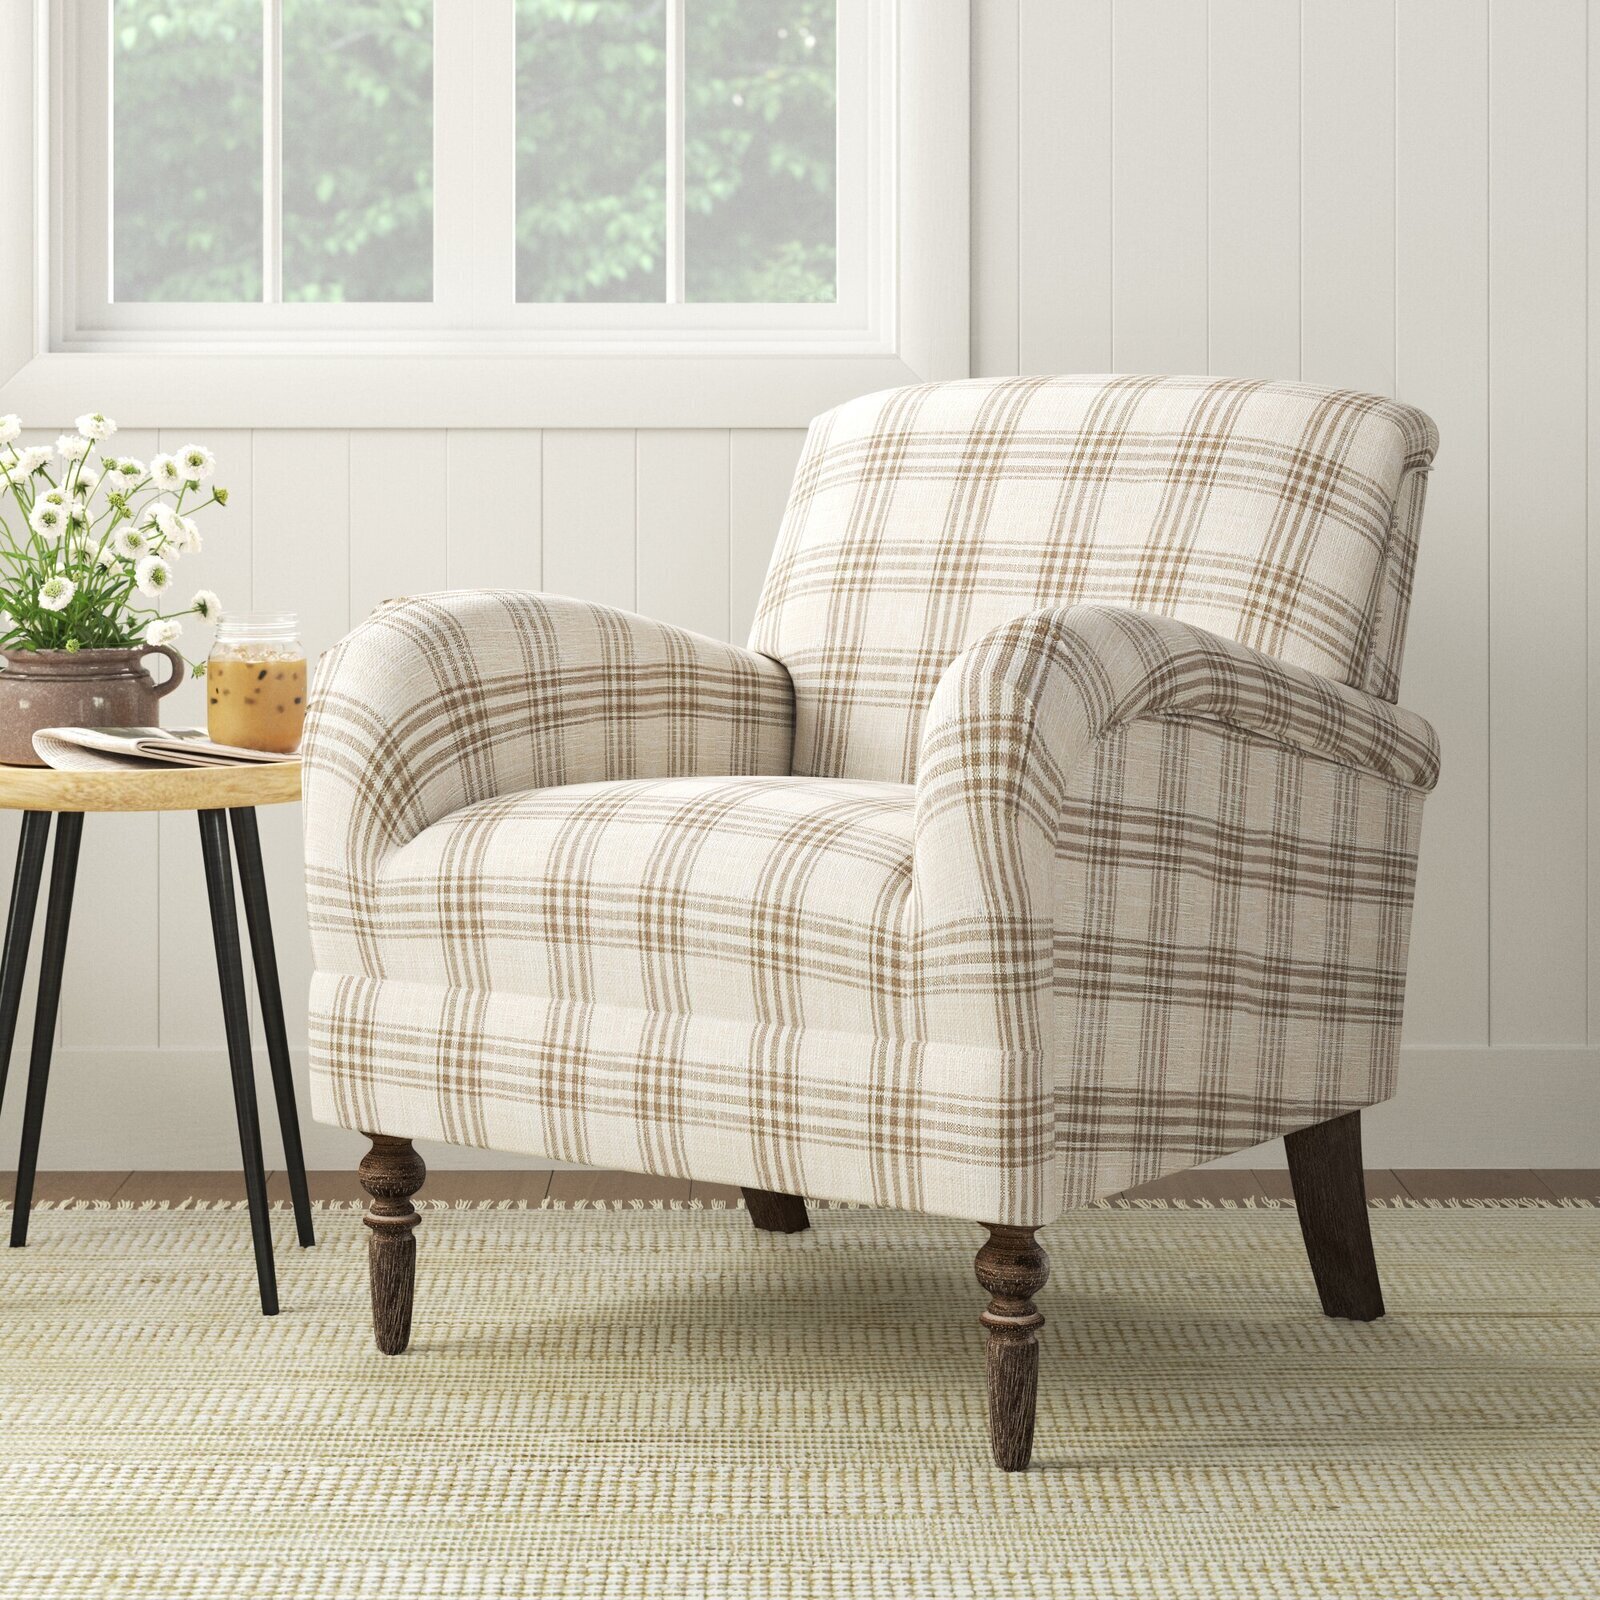 Plaid Patterned Armchair